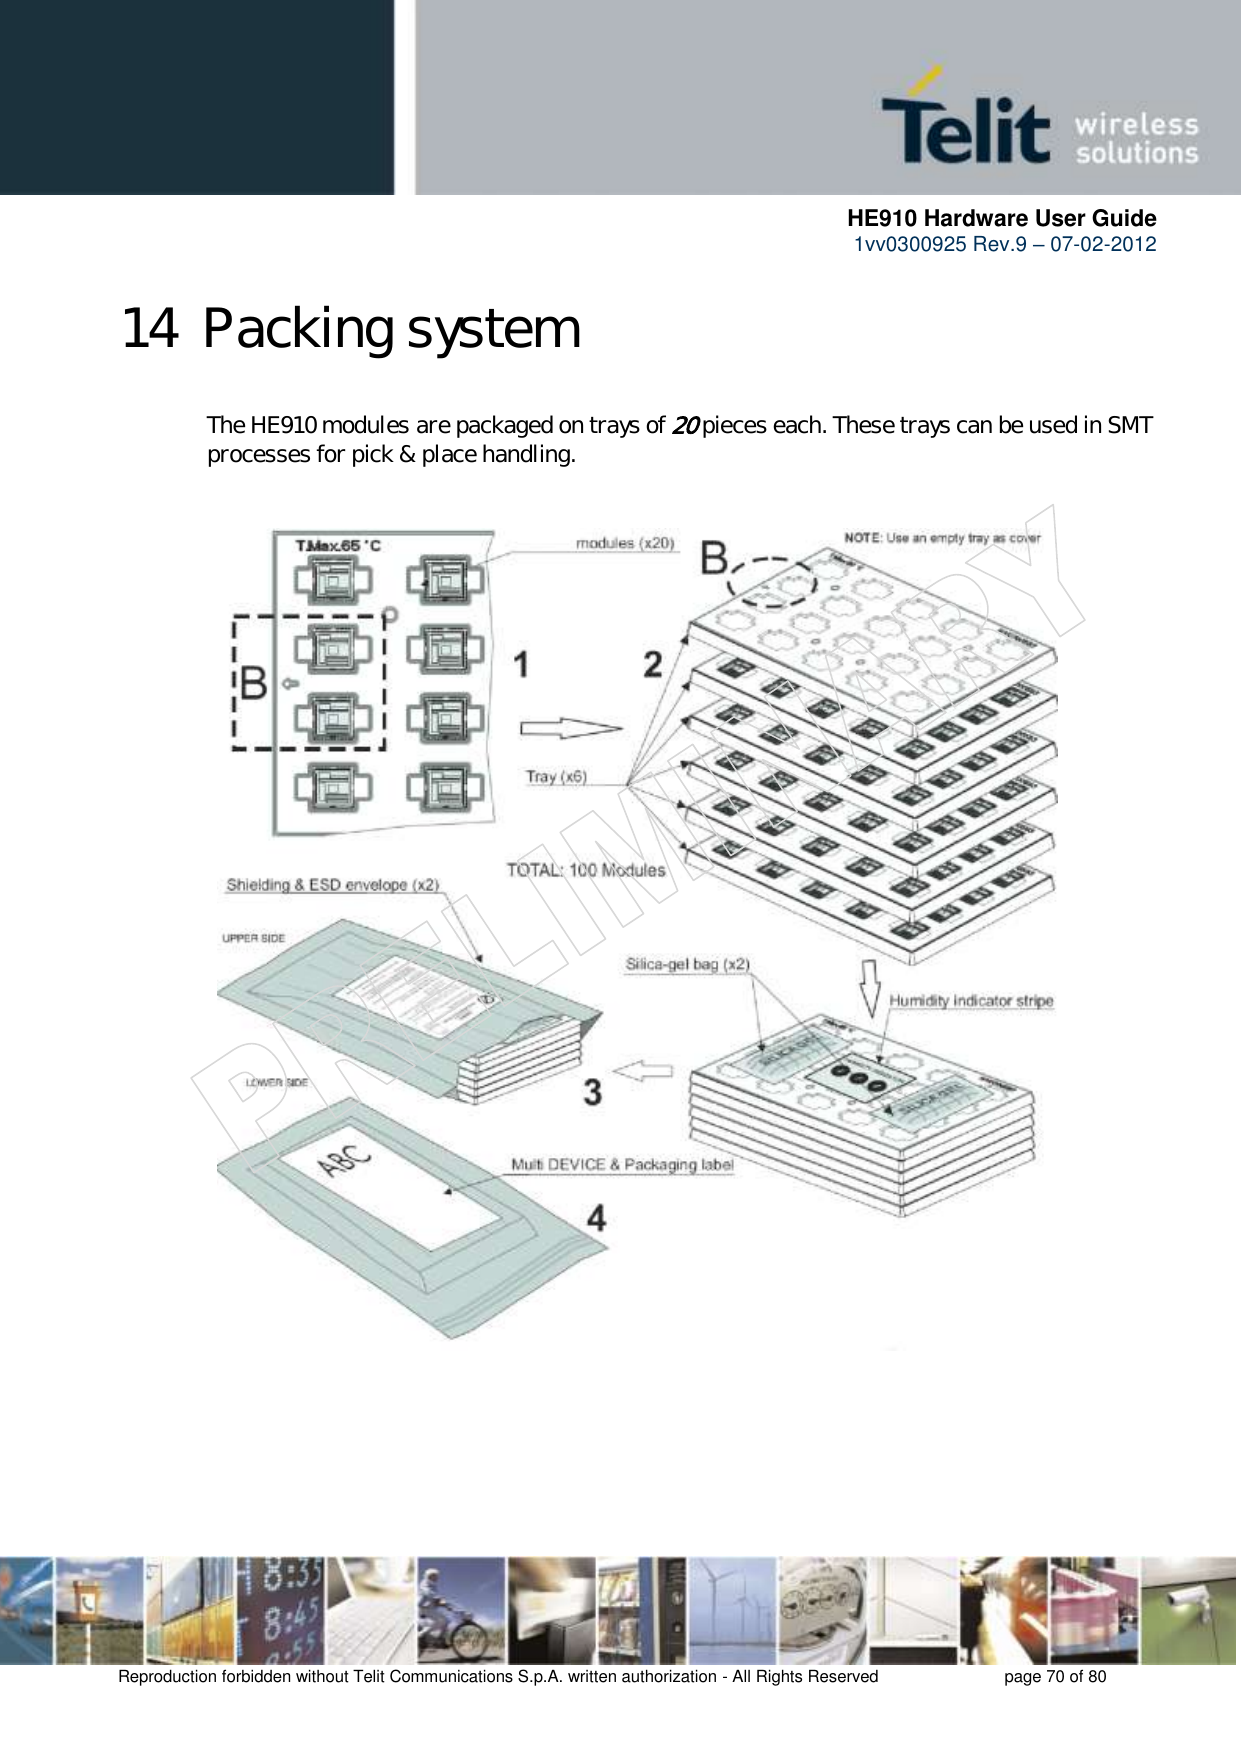      HE910 Hardware User Guide 1vv0300925 Rev.9 – 07-02-2012    Reproduction forbidden without Telit Communications S.p.A. written authorization - All Rights Reserved    page 70 of 80  14 Packing system  The HE910 modules are packaged on trays of 20 pieces each. These trays can be used in SMT processes for pick &amp; place handling.     